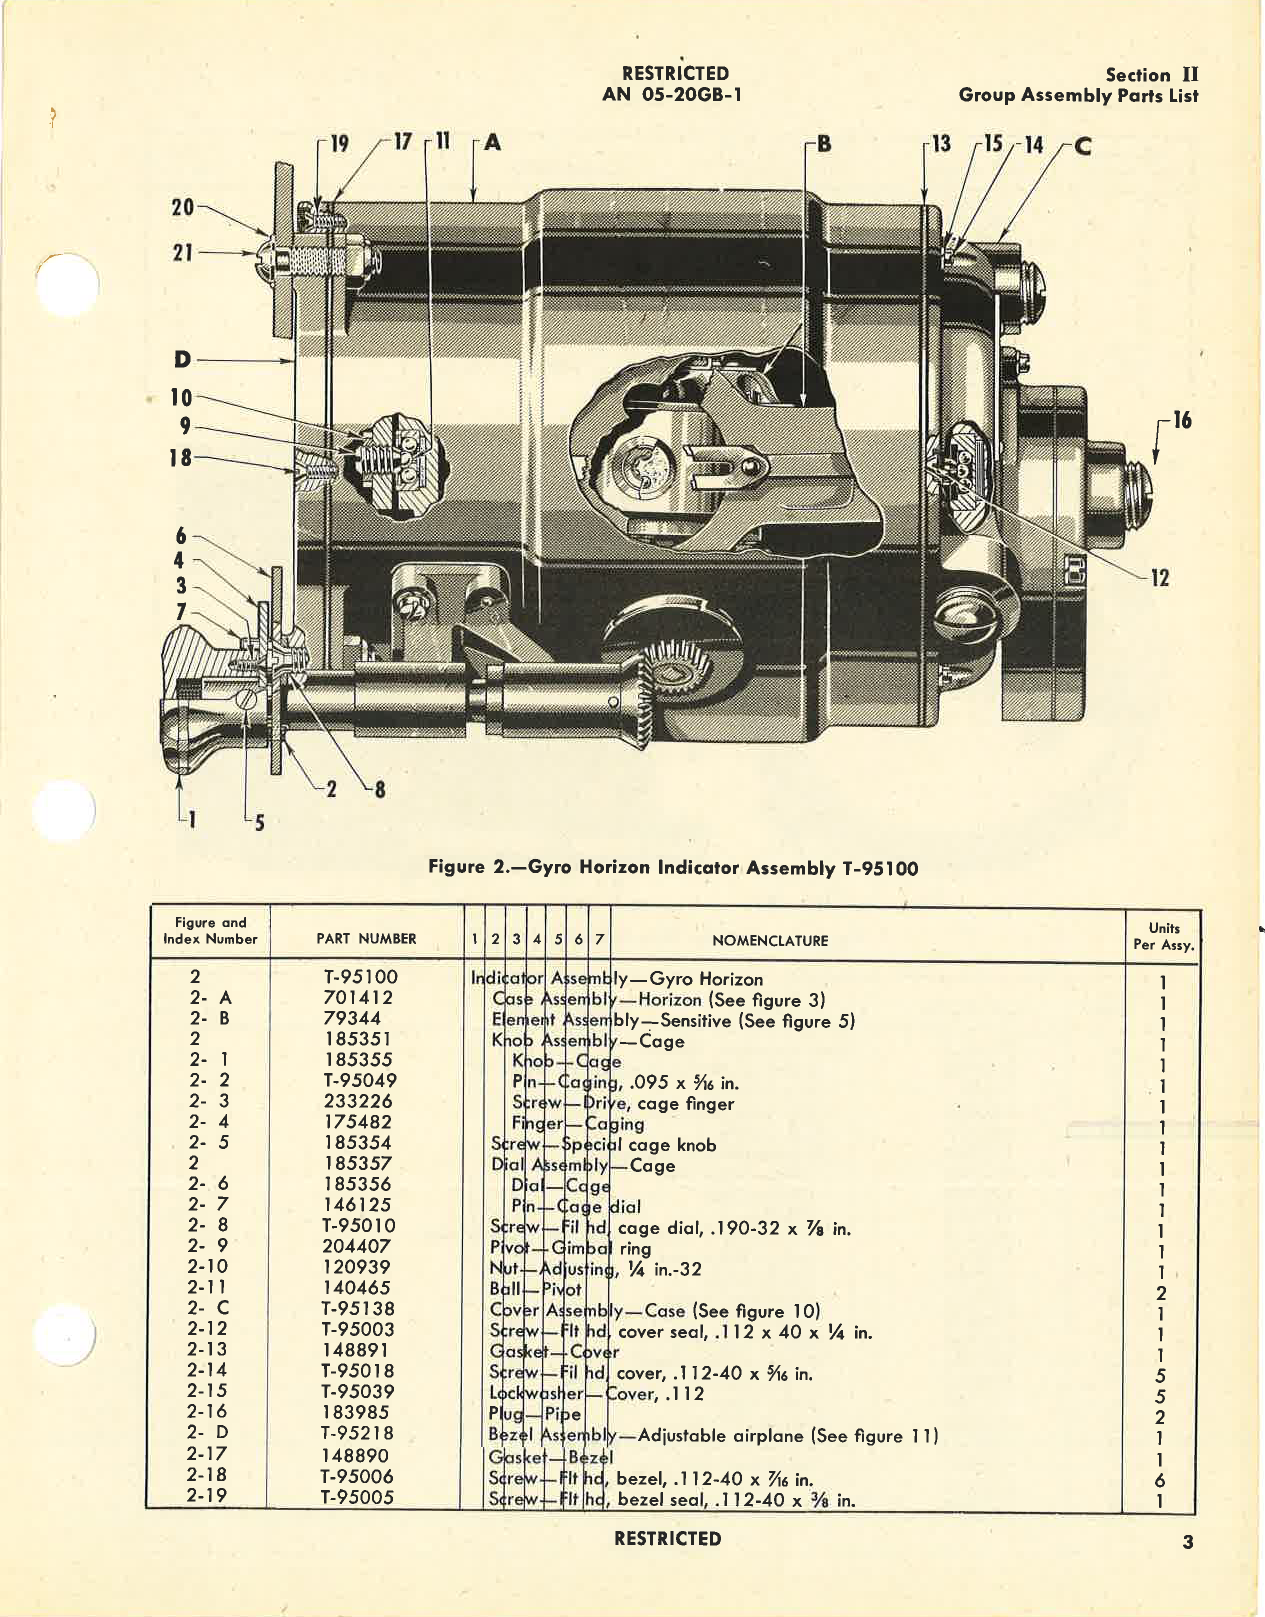 Sample page 5 from AirCorps Library document: Parts Catalog for Type AN 5736-1 Gyro Horizon Indicator